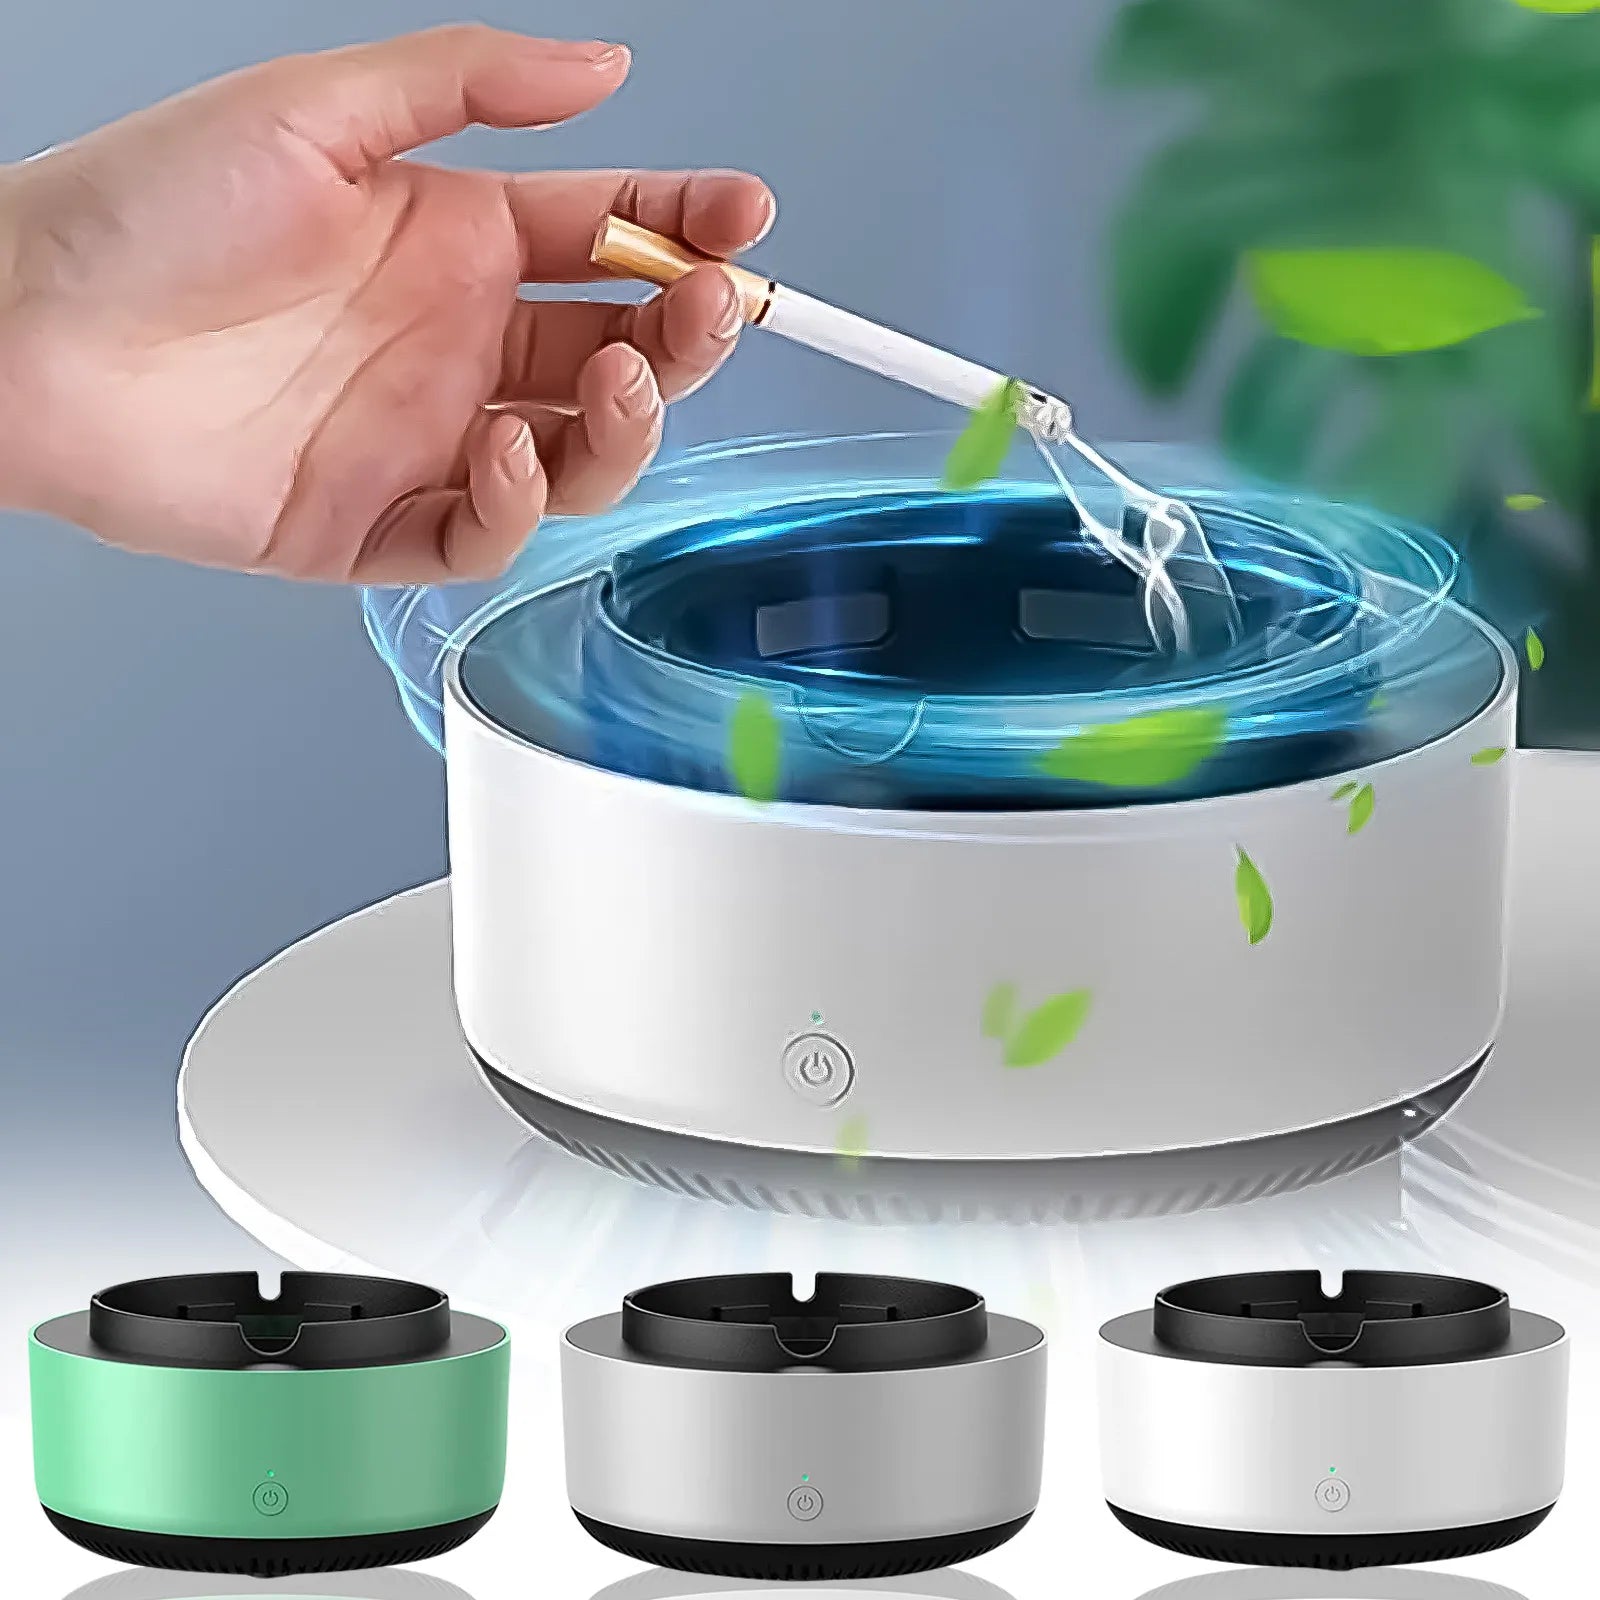 The Ashtray Air- Purifier Intelligently Removes- Secondhand Smoke-Smokes-Smoke-s Smo-kes In The Living Room And Office